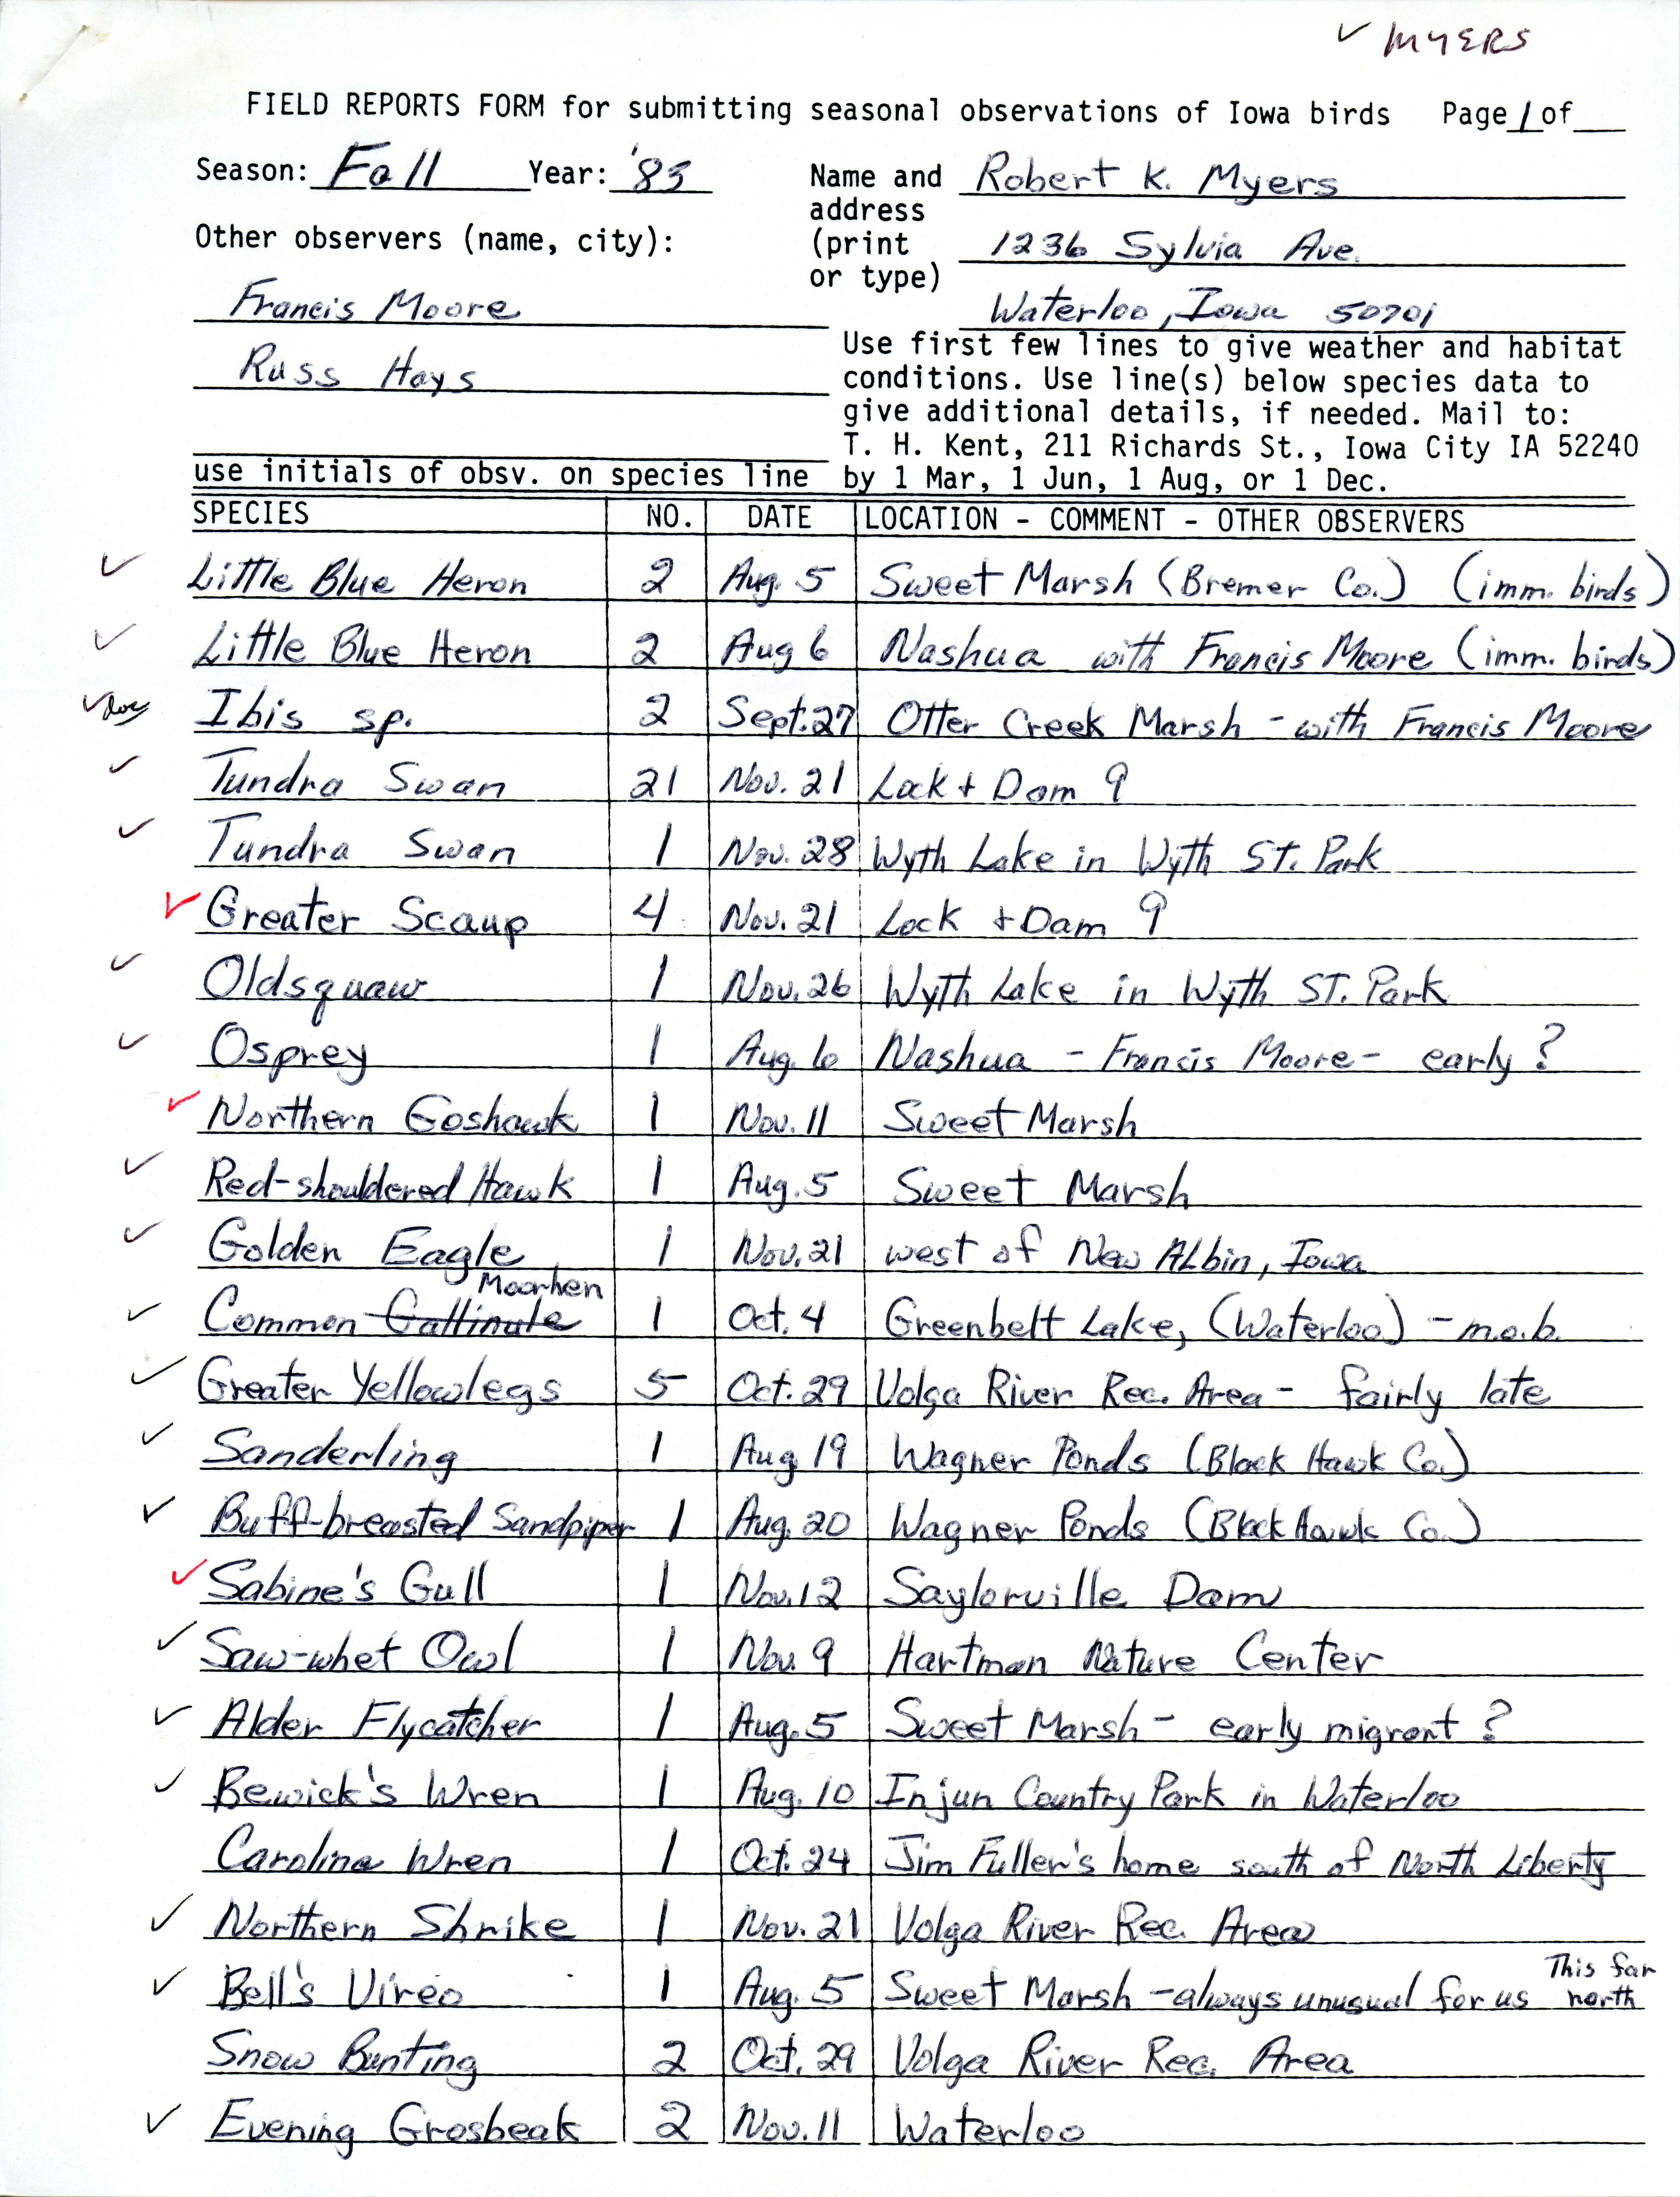 Field reports form for submitting seasonal observations of Iowa birds, Robert Myers, fall 1983